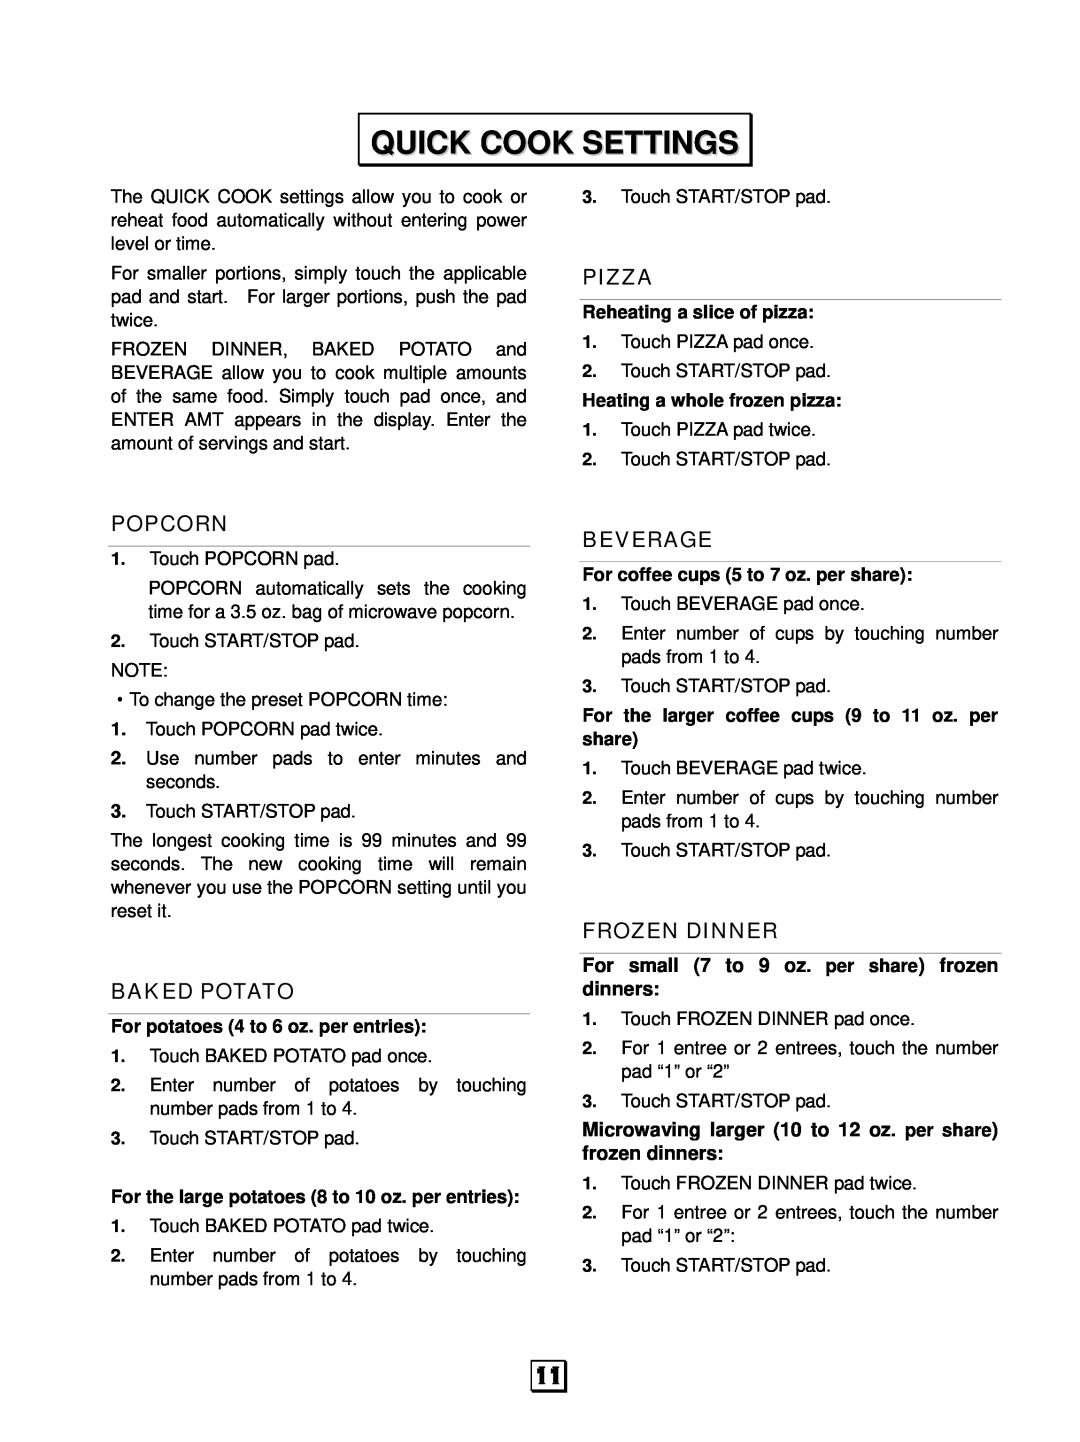 RCA RMW1156 owner manual Quick Cook Settings, Pizza, Popcorn, Baked Potato, Beverage, Frozen Dinner 